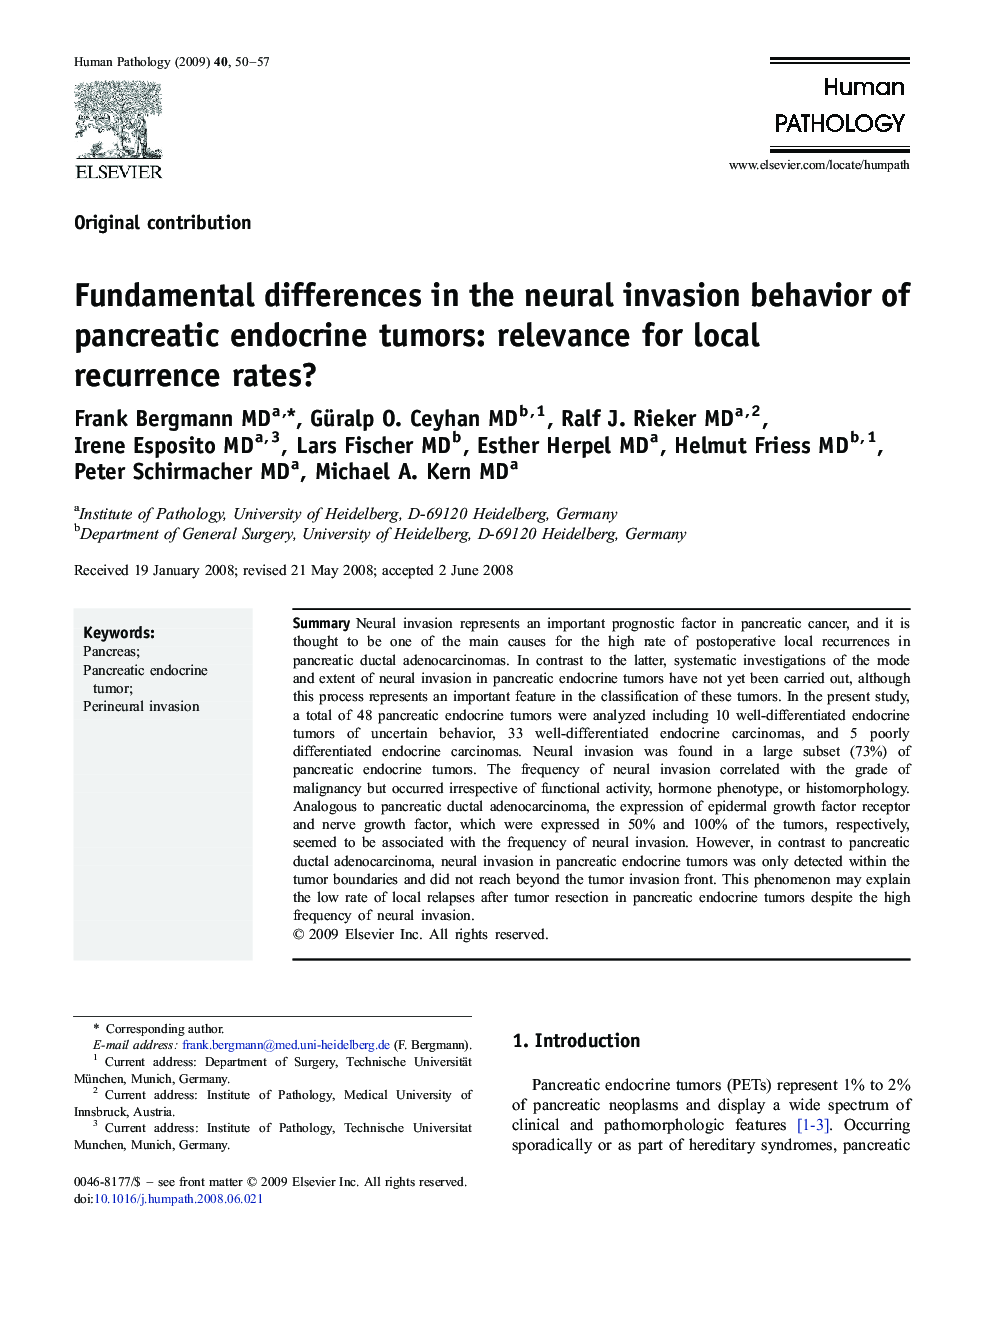 Fundamental differences in the neural invasion behavior of pancreatic endocrine tumors: relevance for local recurrence rates?